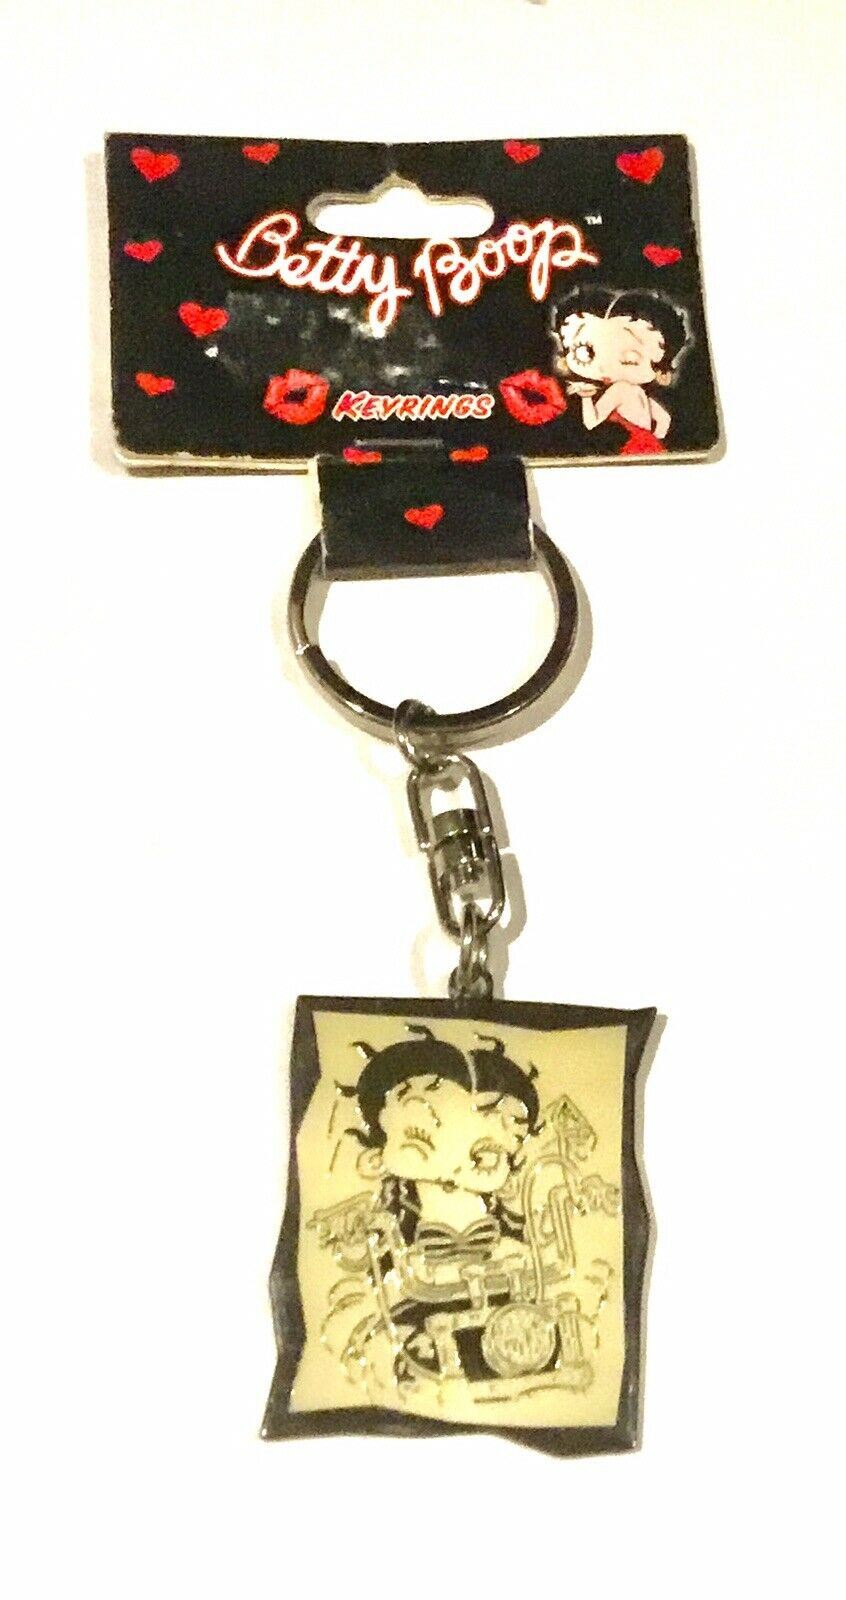 BETTY BOOP KEY RING OFFICIAL WITH A FREE WALLET JUST ARRIVED RED BB